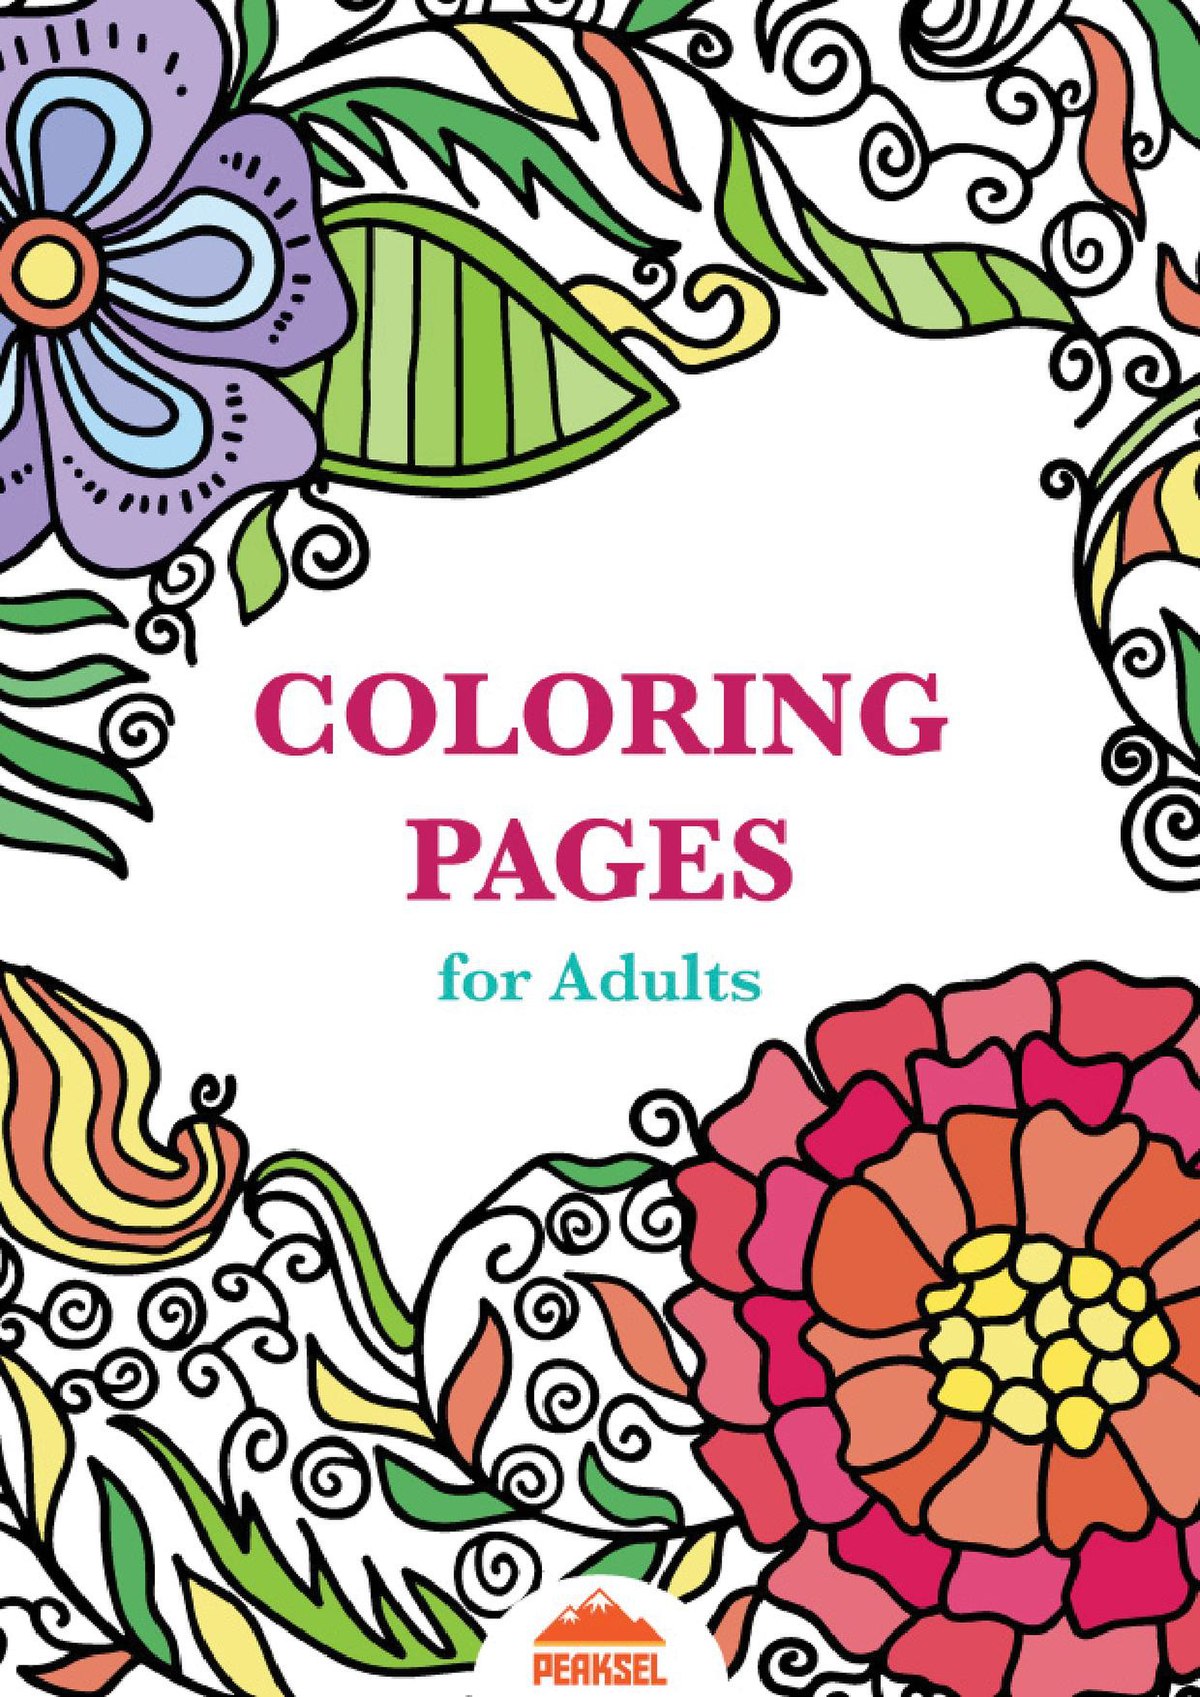 Fileprintable coloring pages for adults